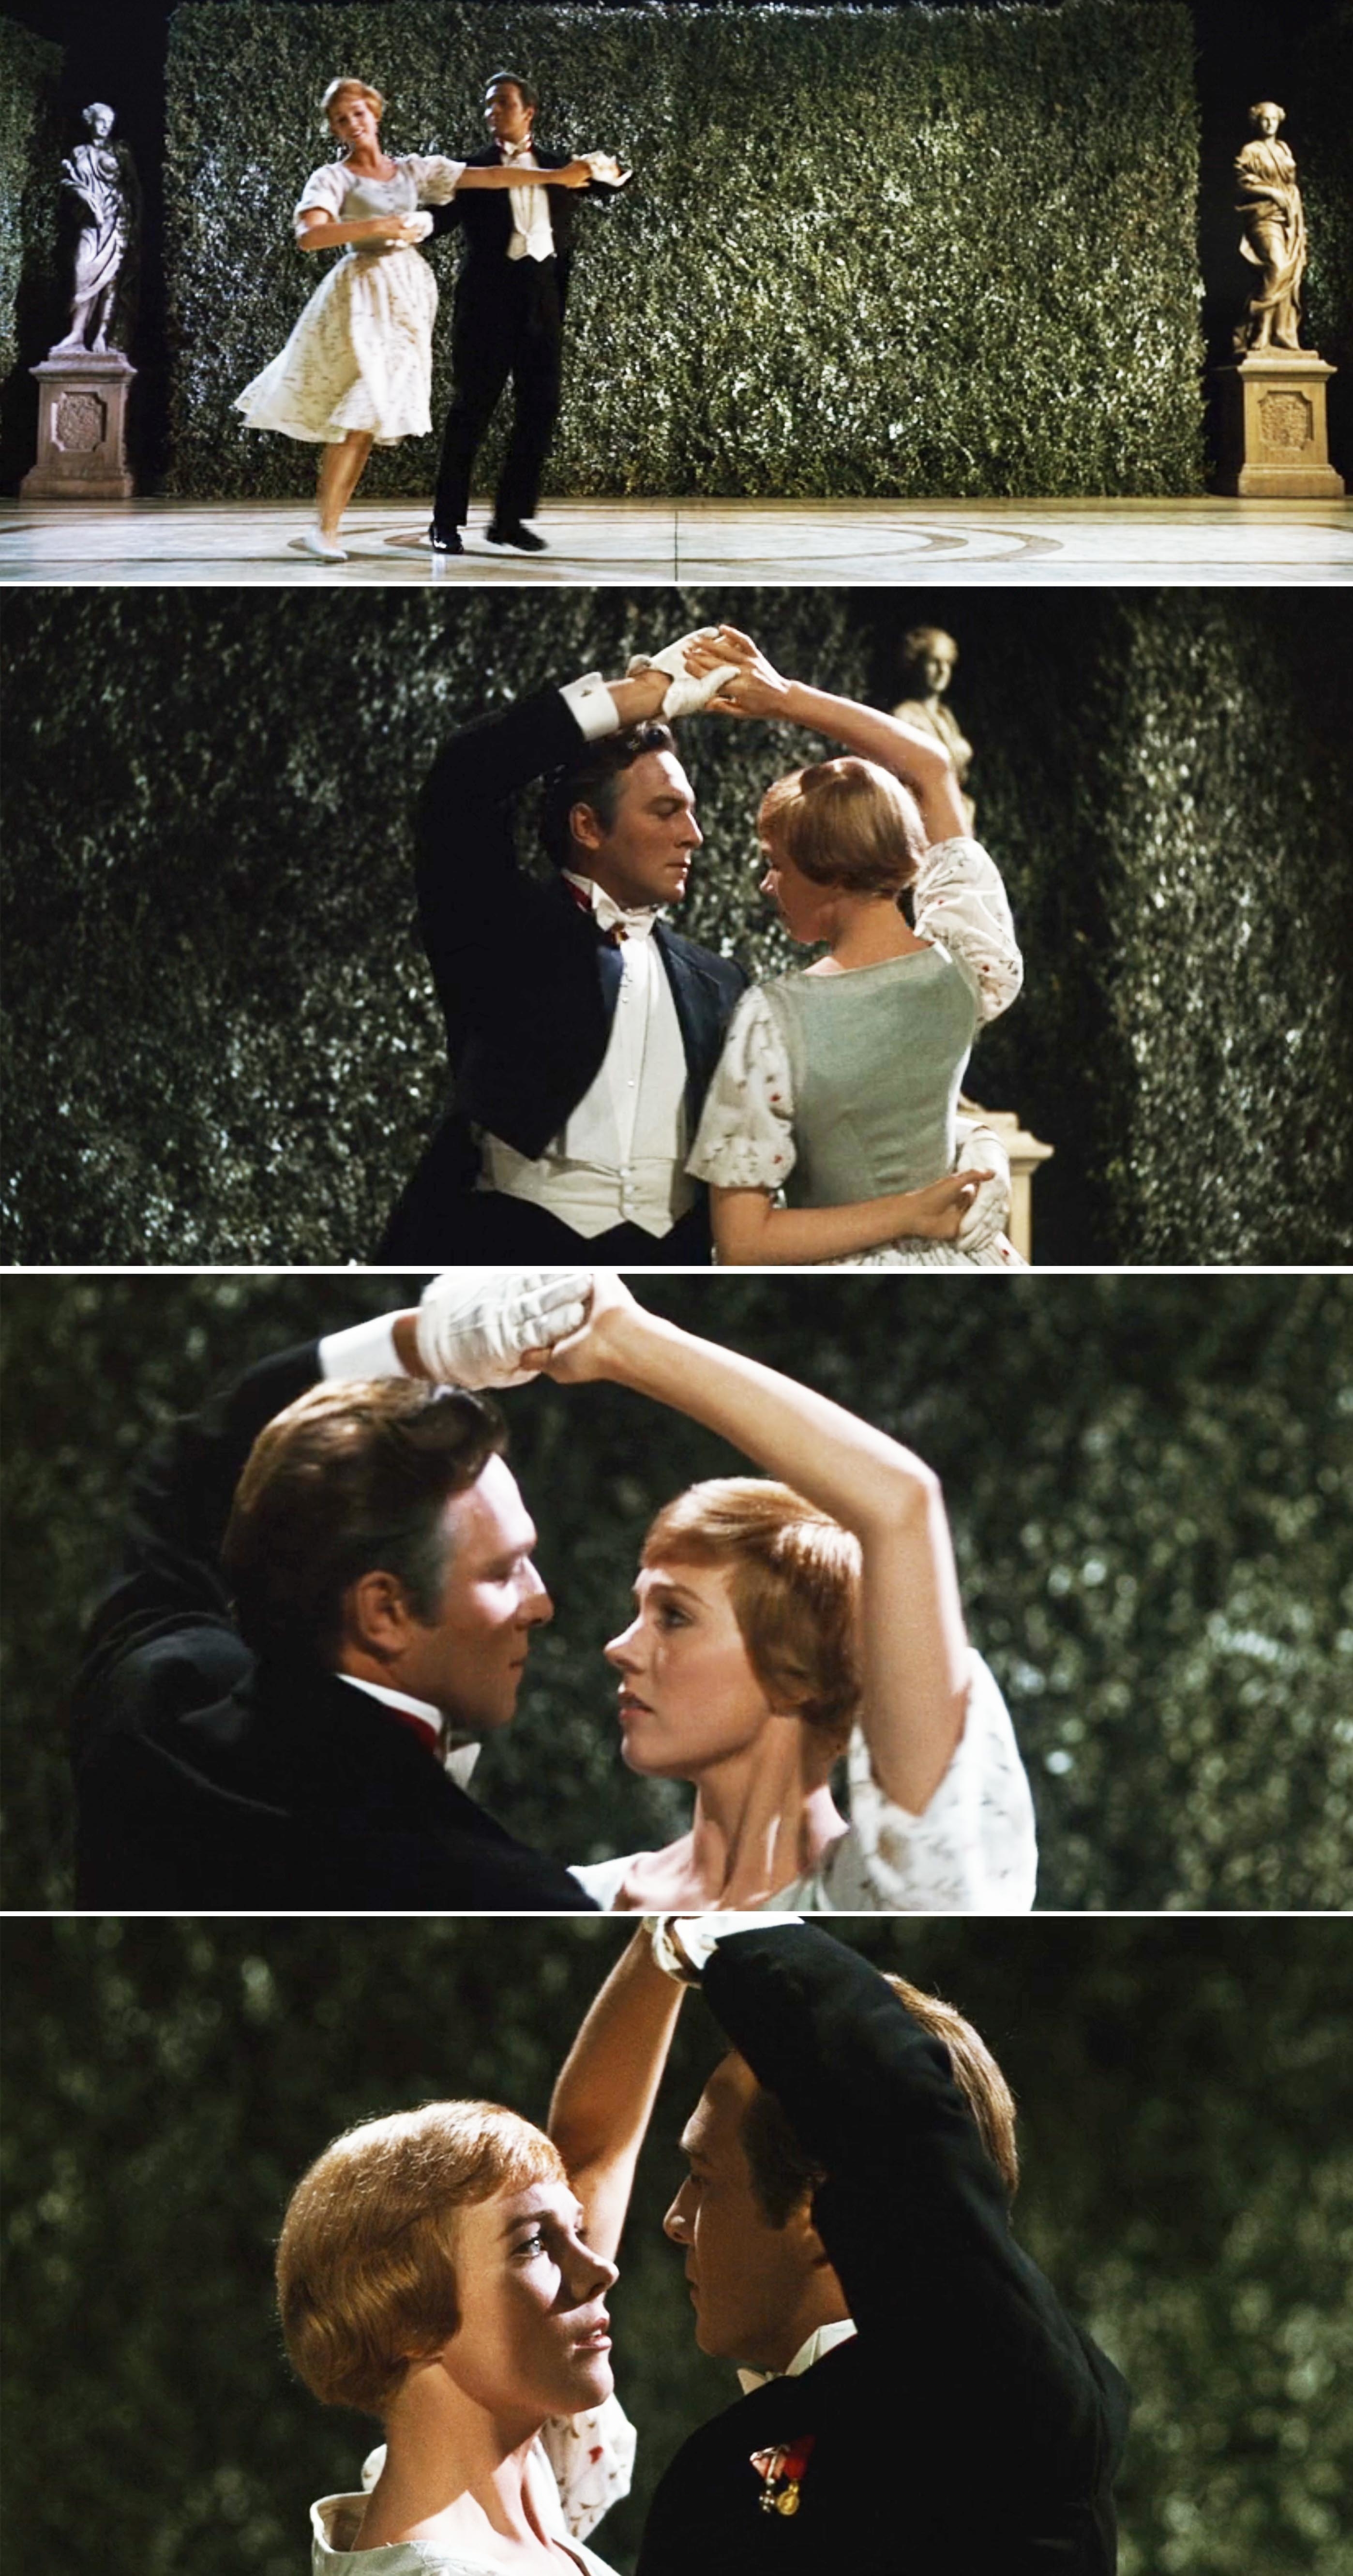 Julie Andrews and Christopher Plummer dance together in elegant attire in scenes from &quot;The Sound of Music.&quot;